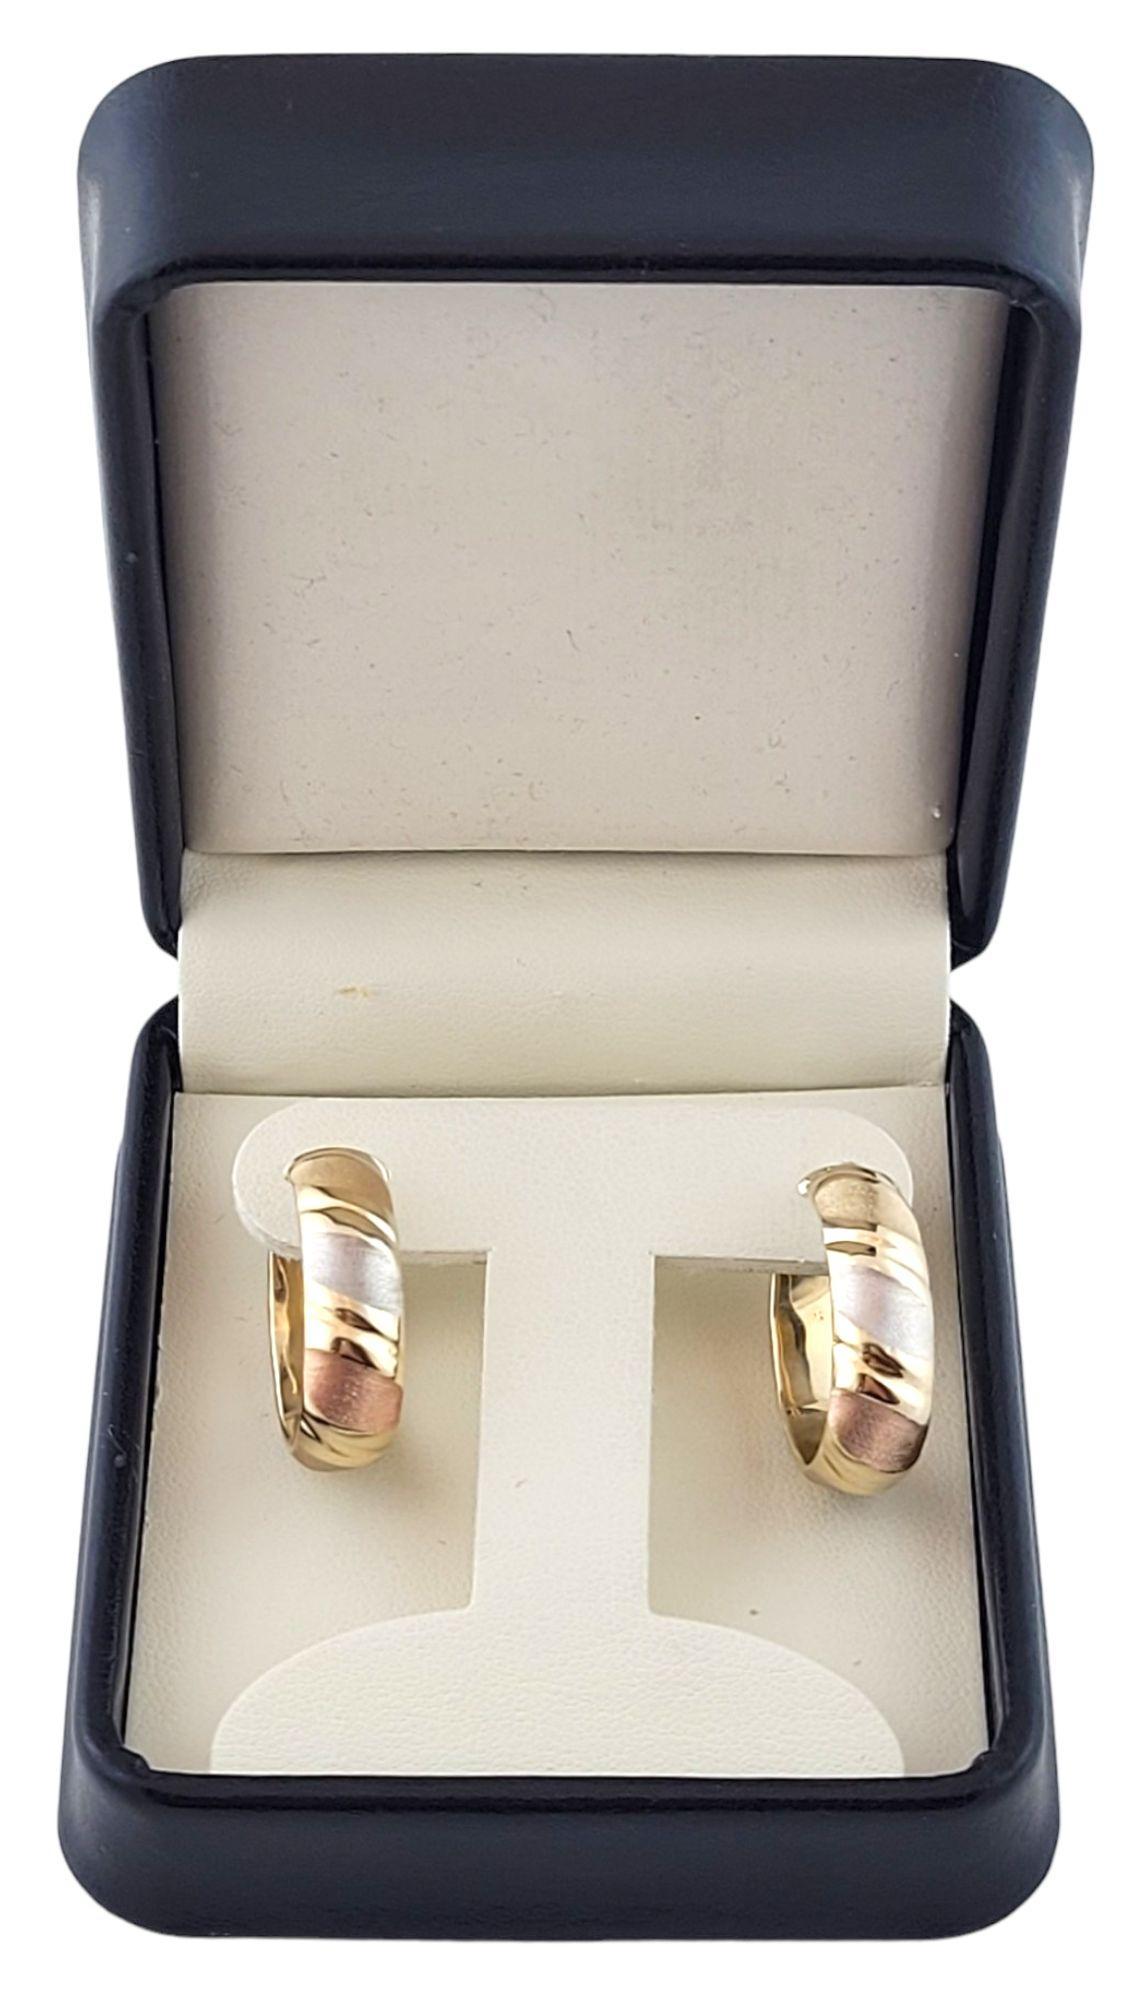 14K White, Yellow, and Rose Gold Tri-Color Hoop Earrings #14962 For Sale 2